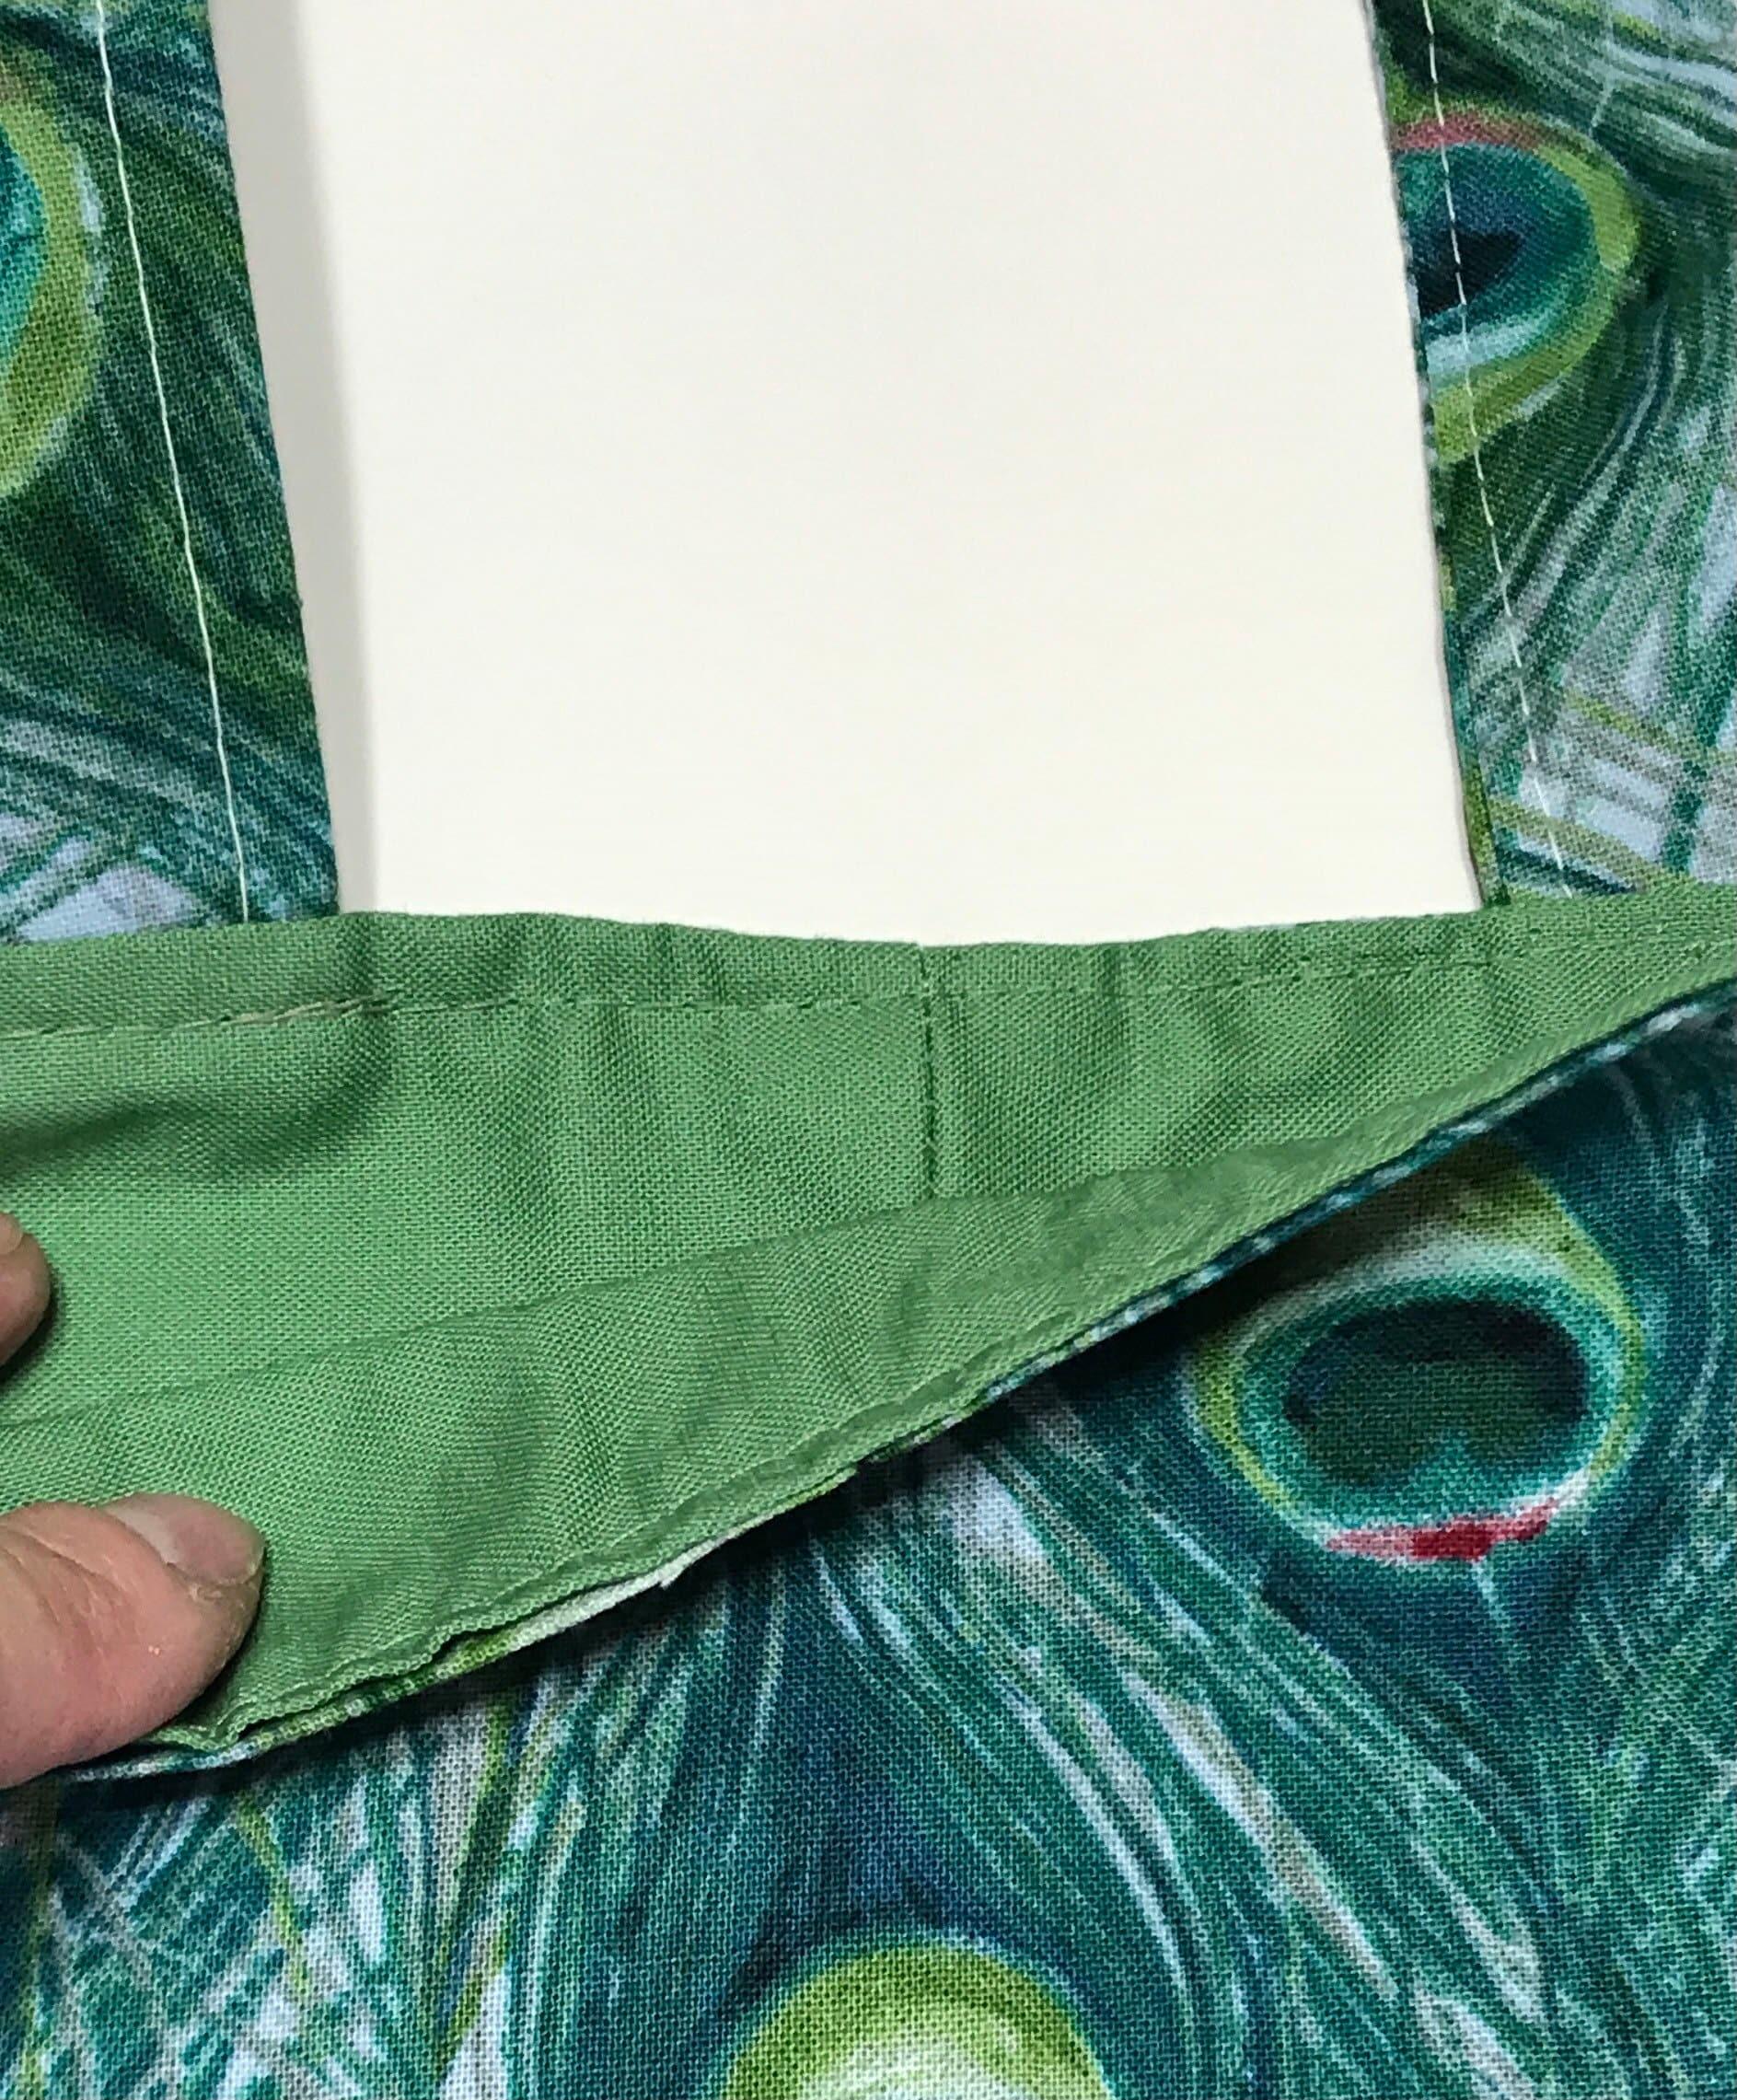 Lining is solid green. Exact green color may vary.